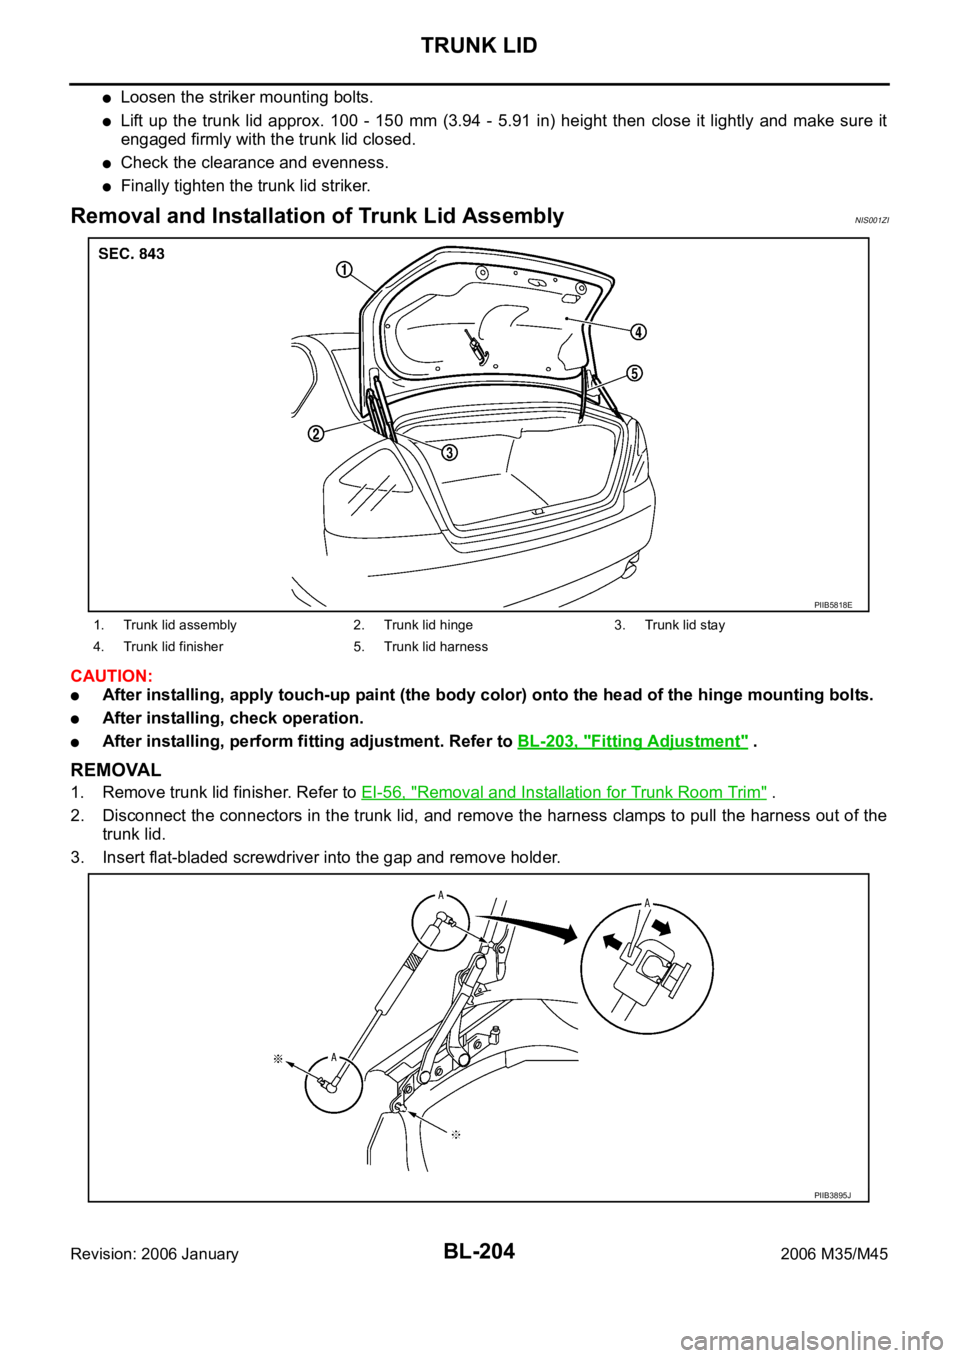 INFINITI M35 2006  Factory Service Manual BL-204
TRUNK LID
Revision: 2006 January2006 M35/M45
Loosen the striker mounting bolts.
Lift up the  trunk lid approx.  100 -  150  mm (3.94 -  5.91  in)  height  then  close  it  lightly  and  make  s